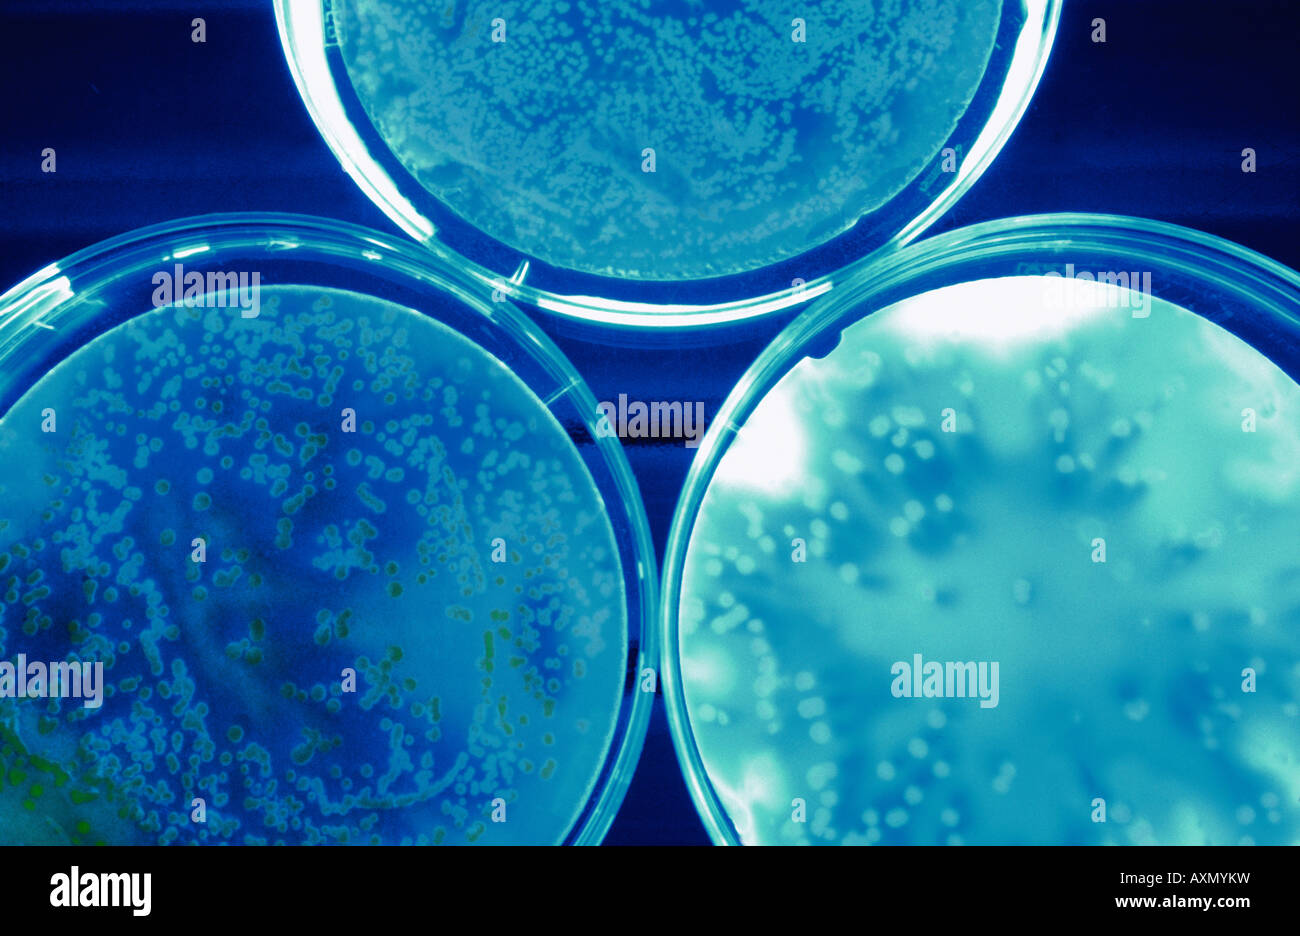 plates with isolated colonies of light emitting bacteria GMO Stock Photo